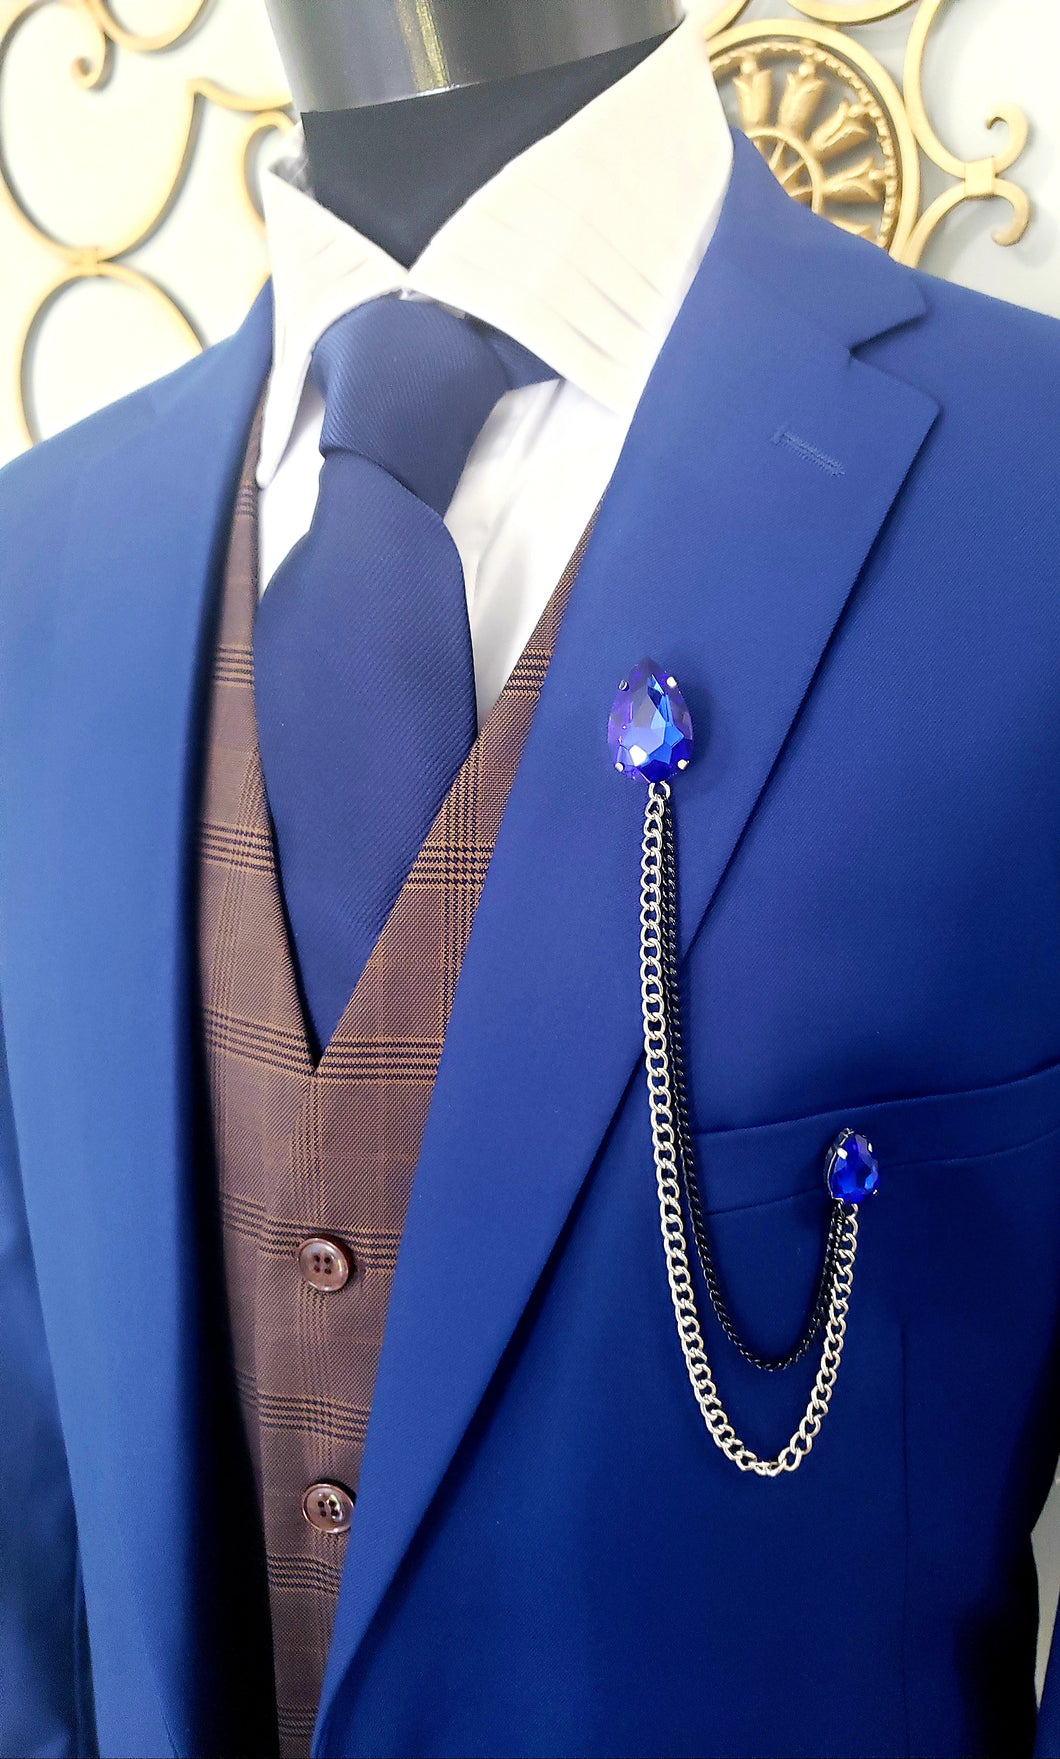 Royal Blue Crystal Lapel Pin with Black/Silver Chains